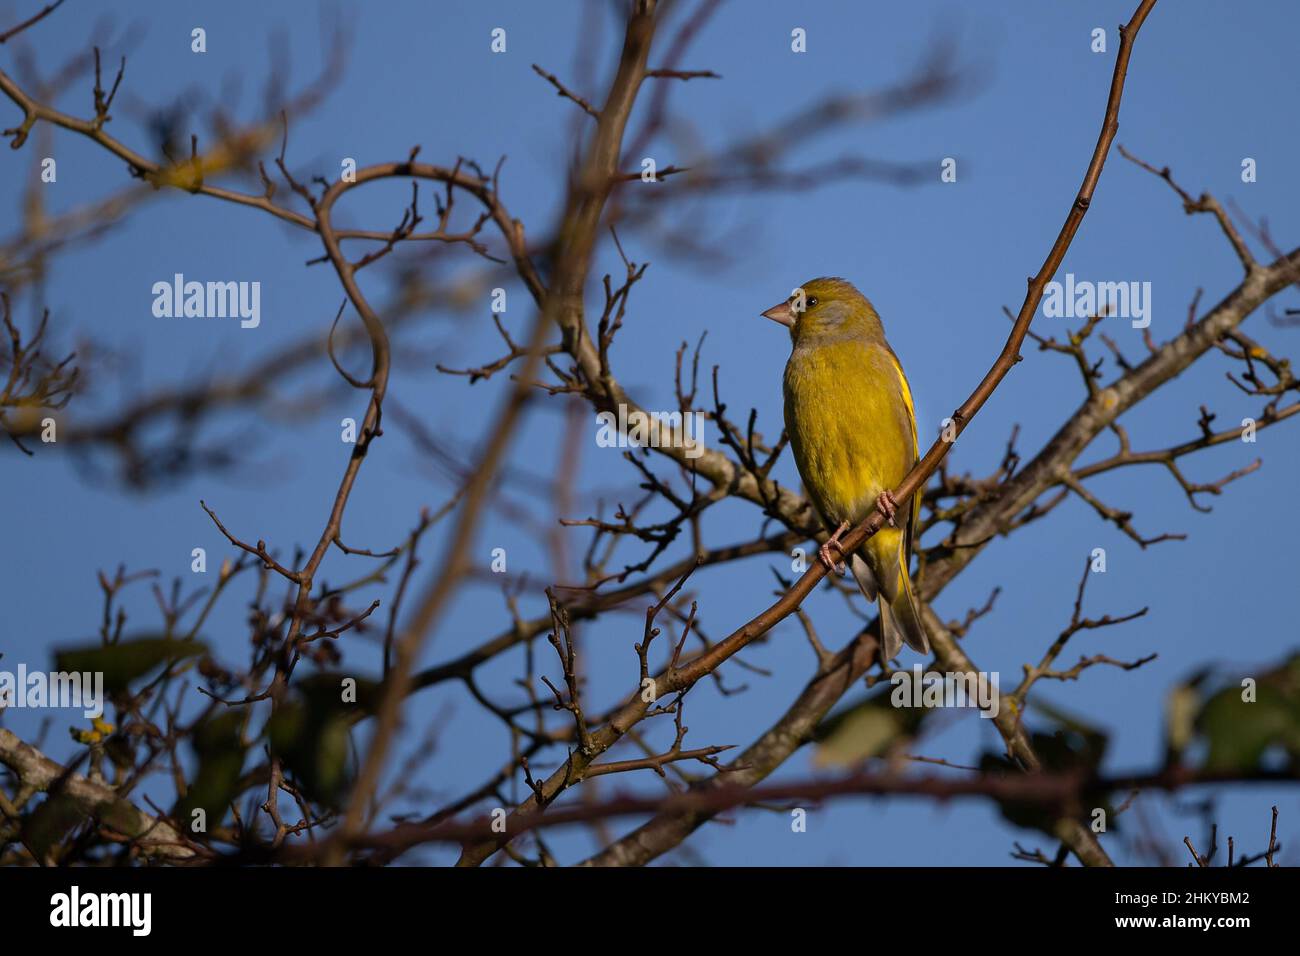 Greenfinch in branches Stock Photo